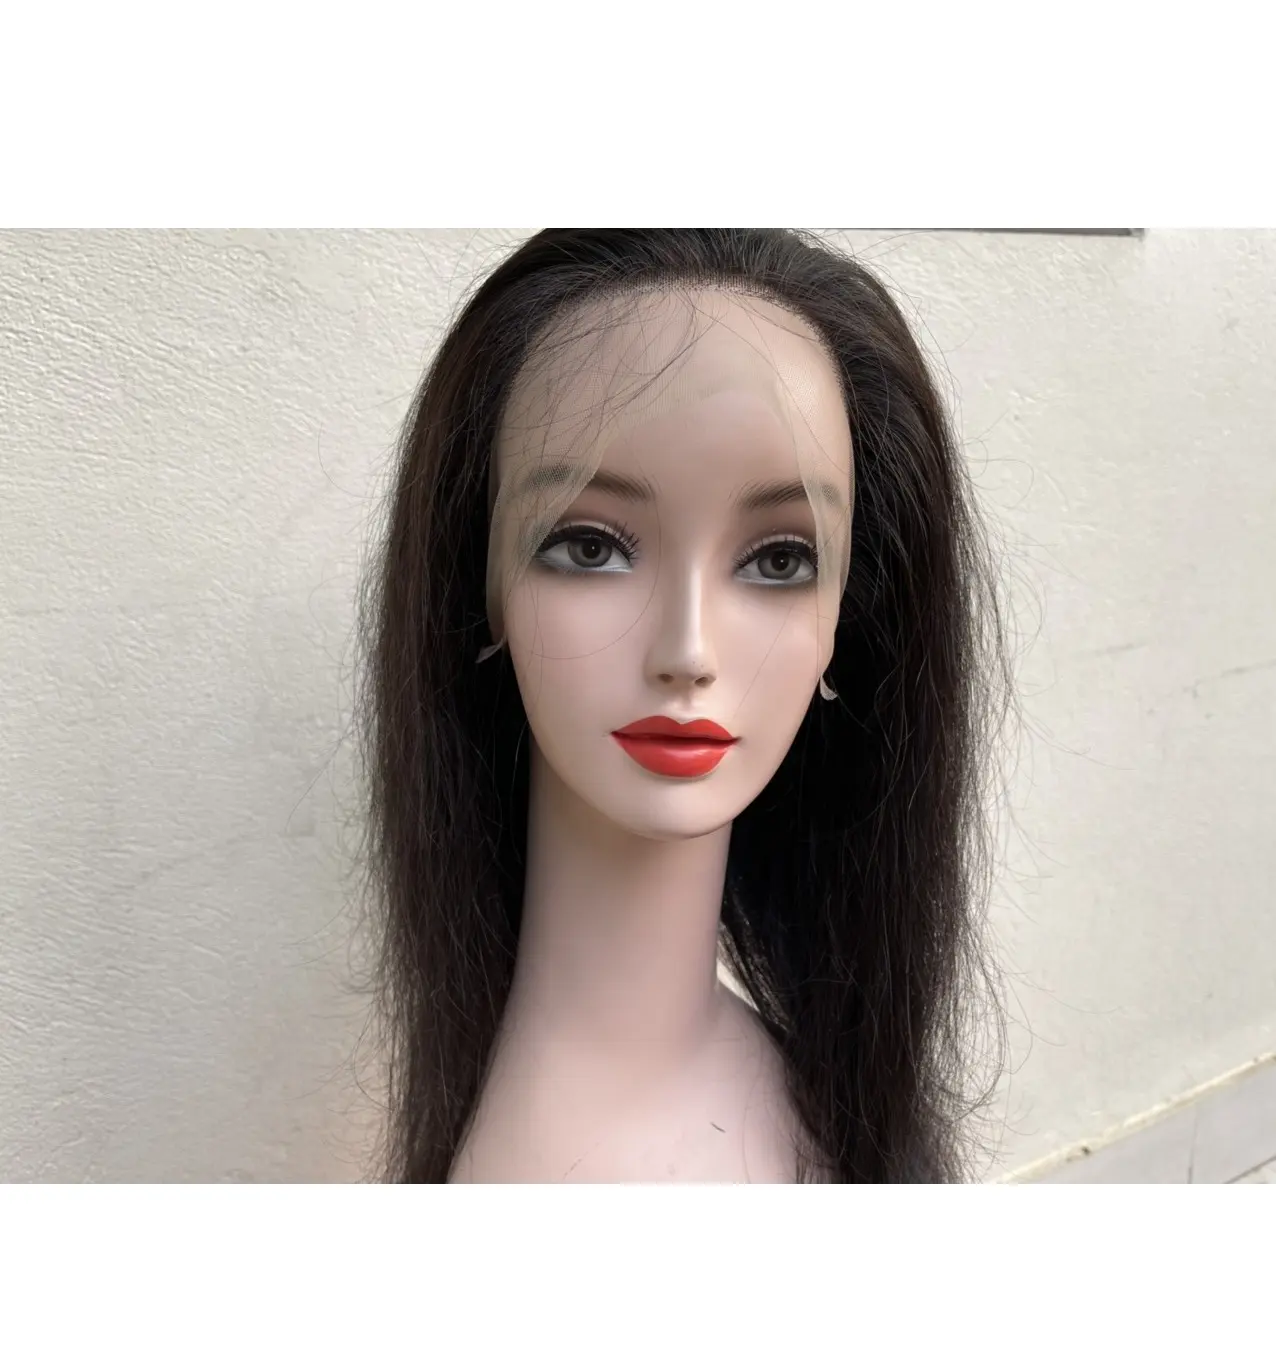 Wholesale wig made from full lace real hair- Virgin Hair Full Lace Closure Wigs Vendor Human Hair Wigs from Vietnam